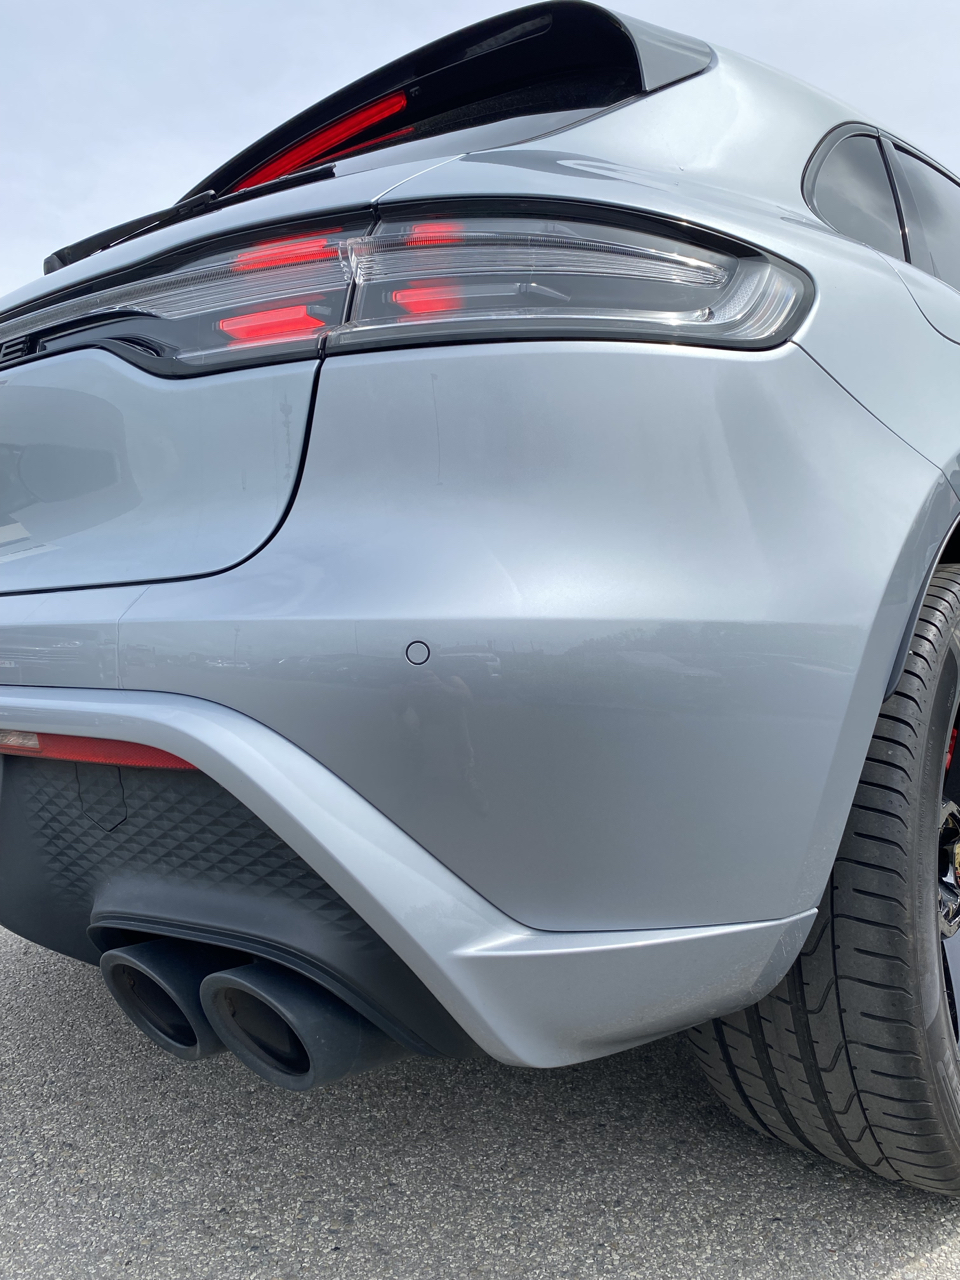 youngtimer.one - Porsche Macan GTS - Dolomite Silver - 2022 - 16 of 43